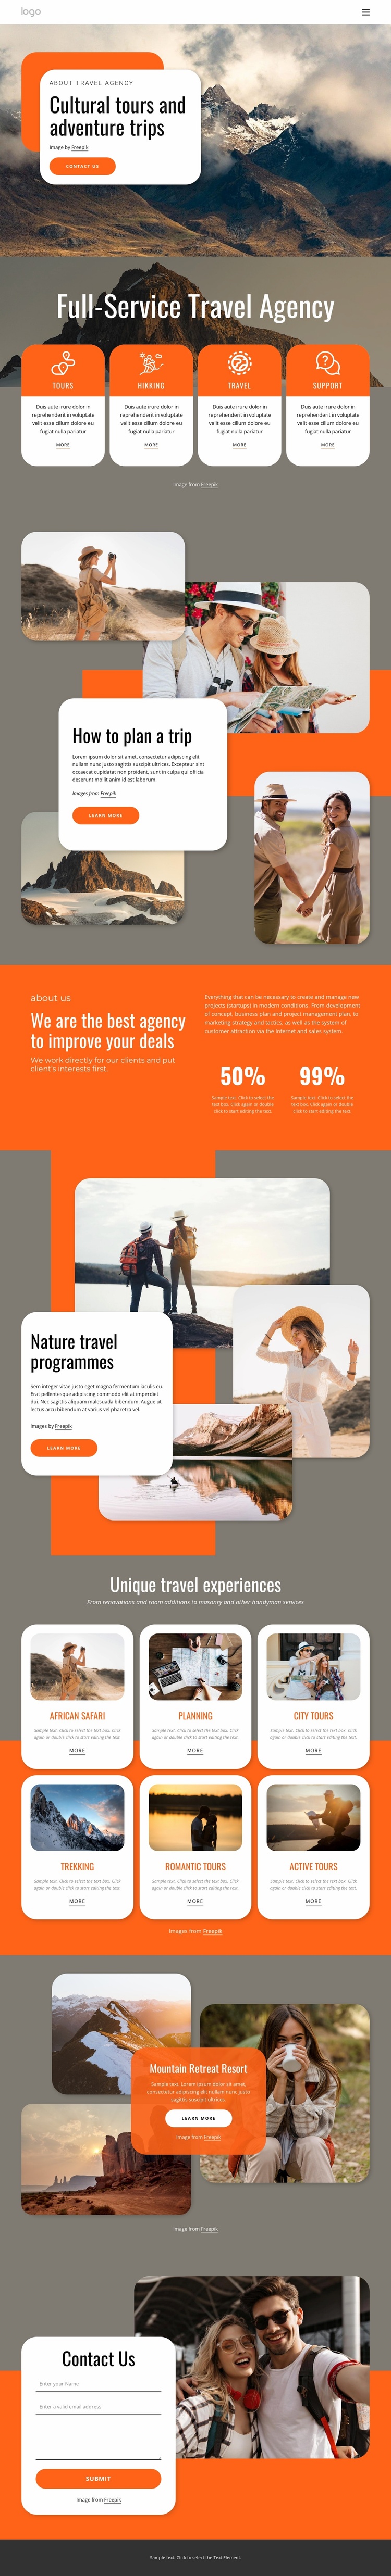 Group travel for all ages Landing Page